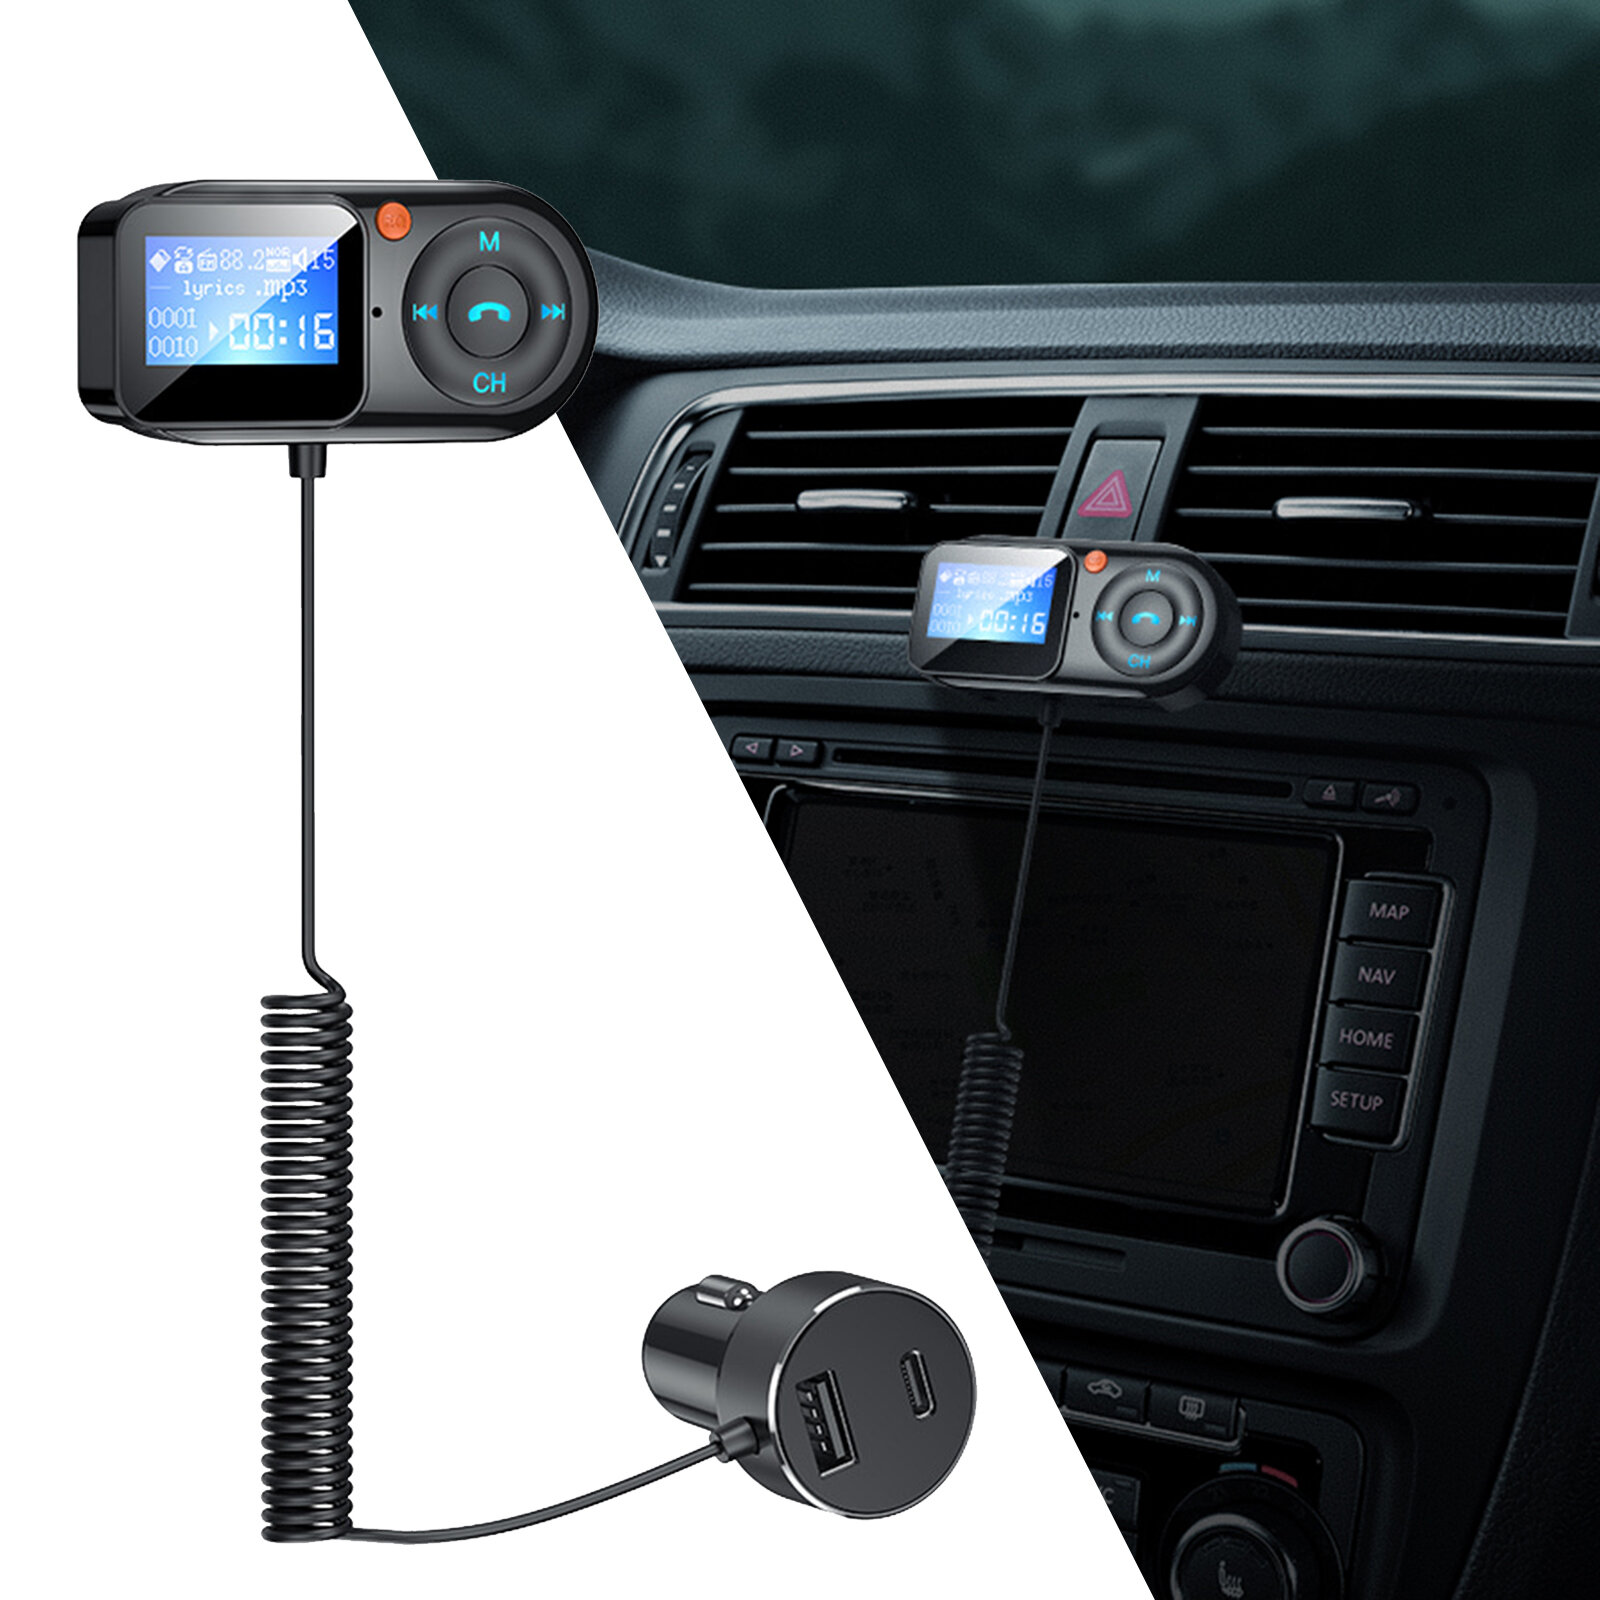 Bakeey T1 Car FM Transmitter bluetooth MP3 Player Handsfree USB Charger Support TF Card Music Player Wireless Aux Audio